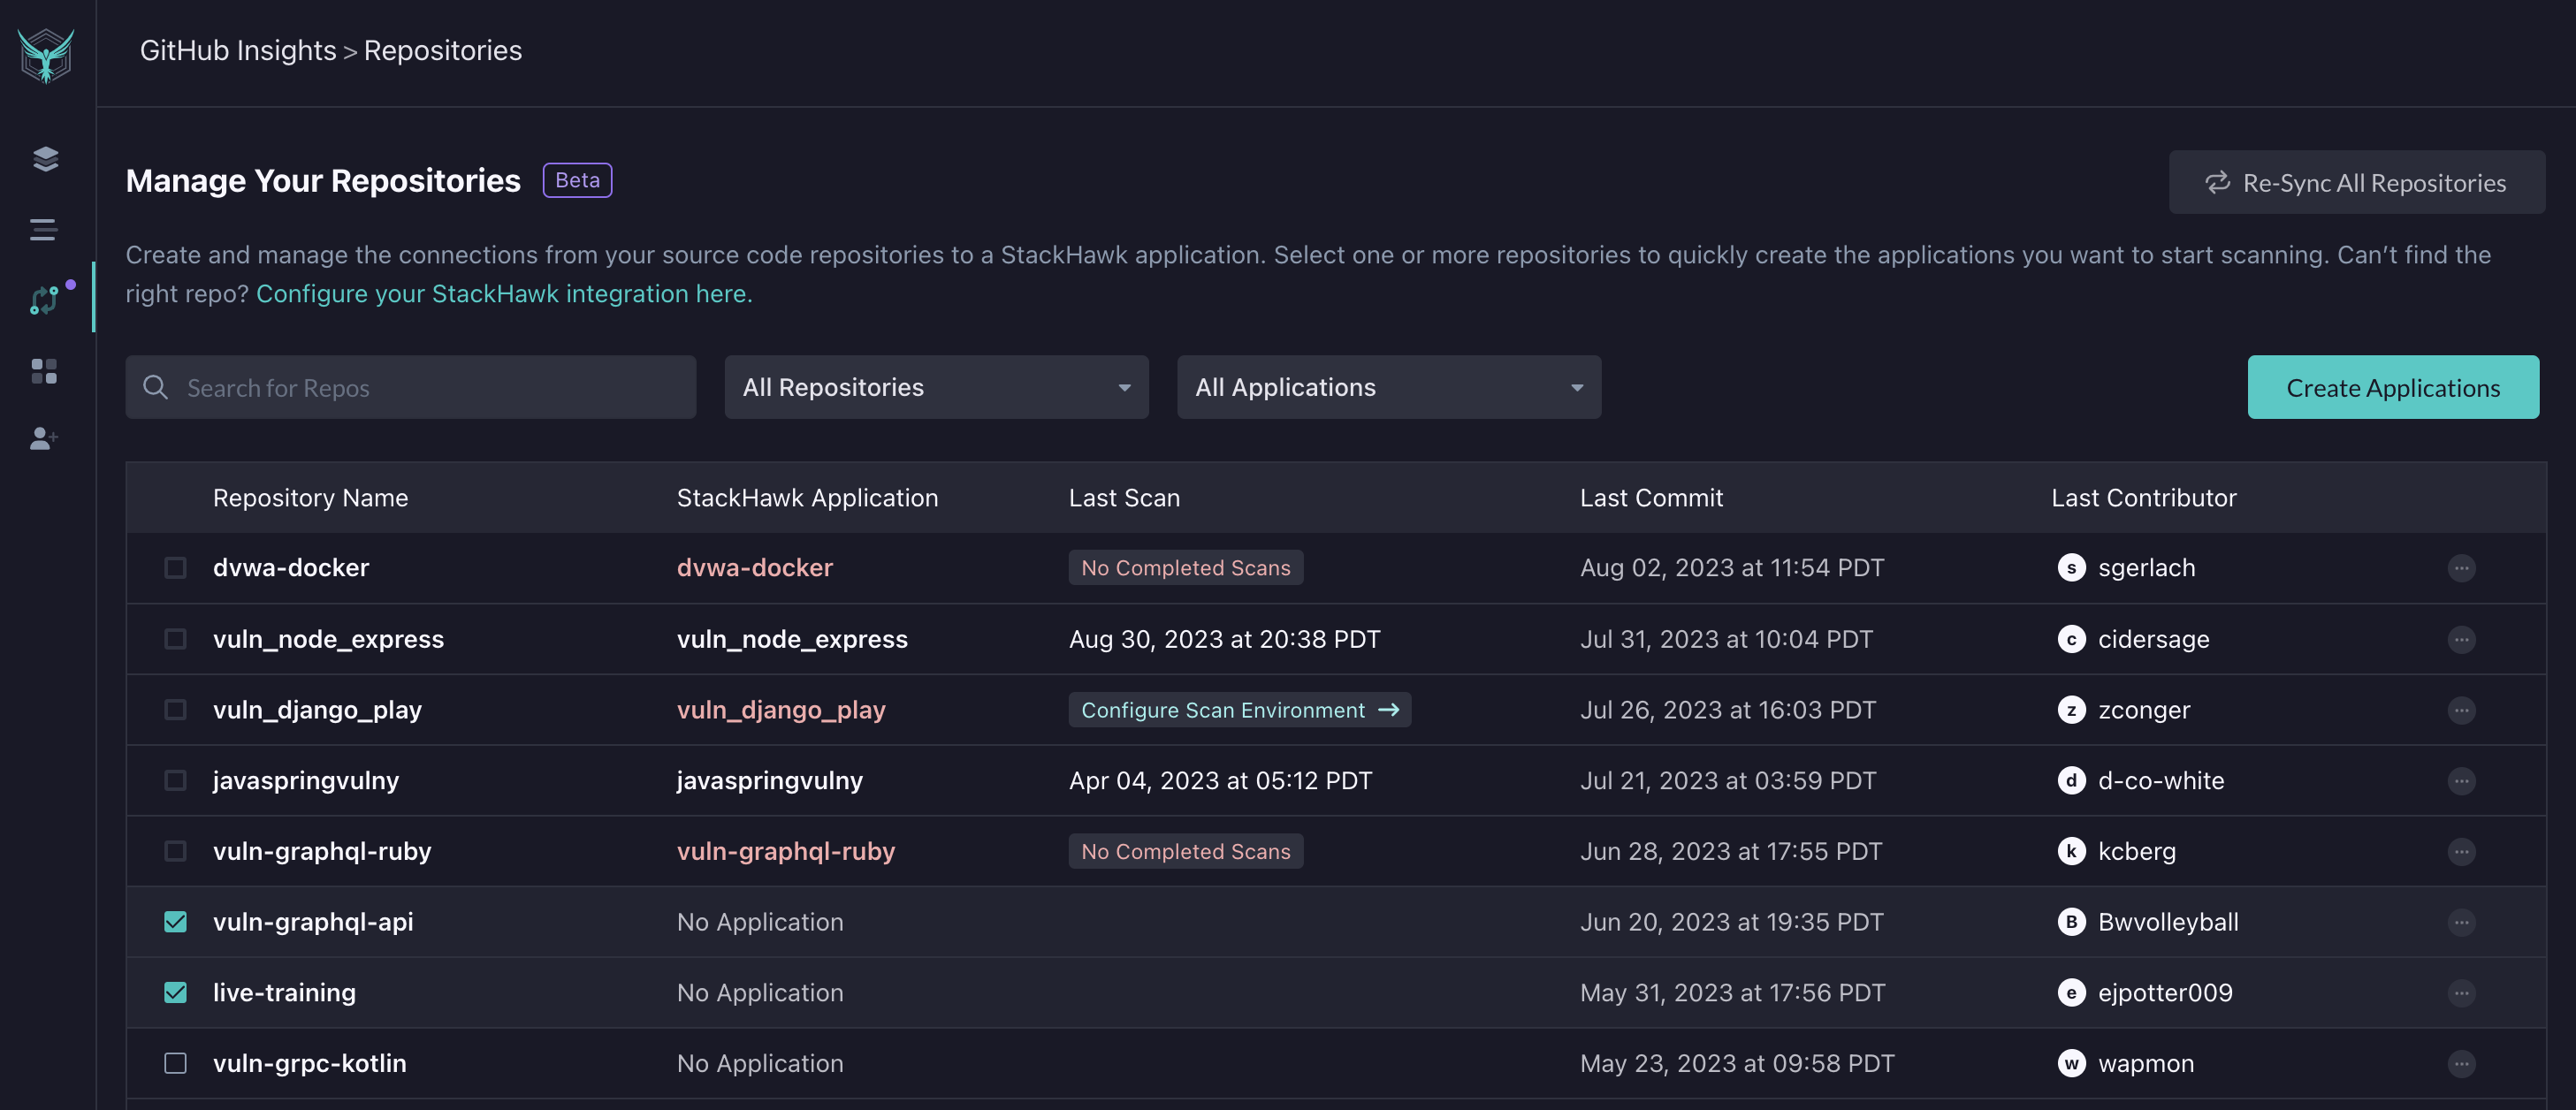 GitHub Insights Repositories Page image